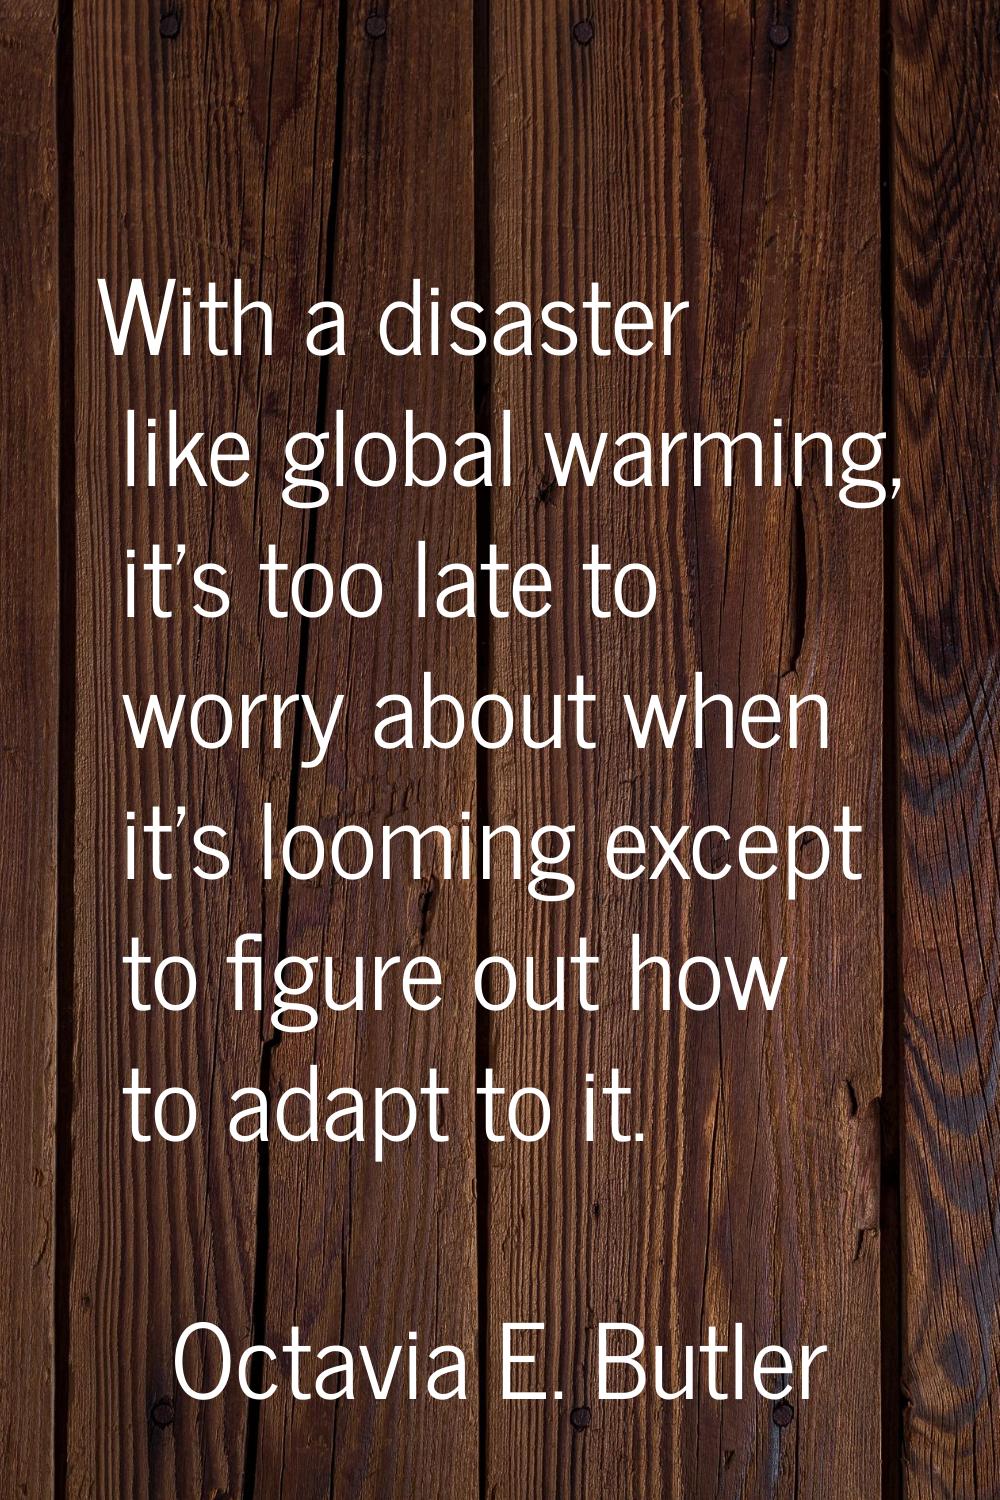 With a disaster like global warming, it's too late to worry about when it's looming except to figur